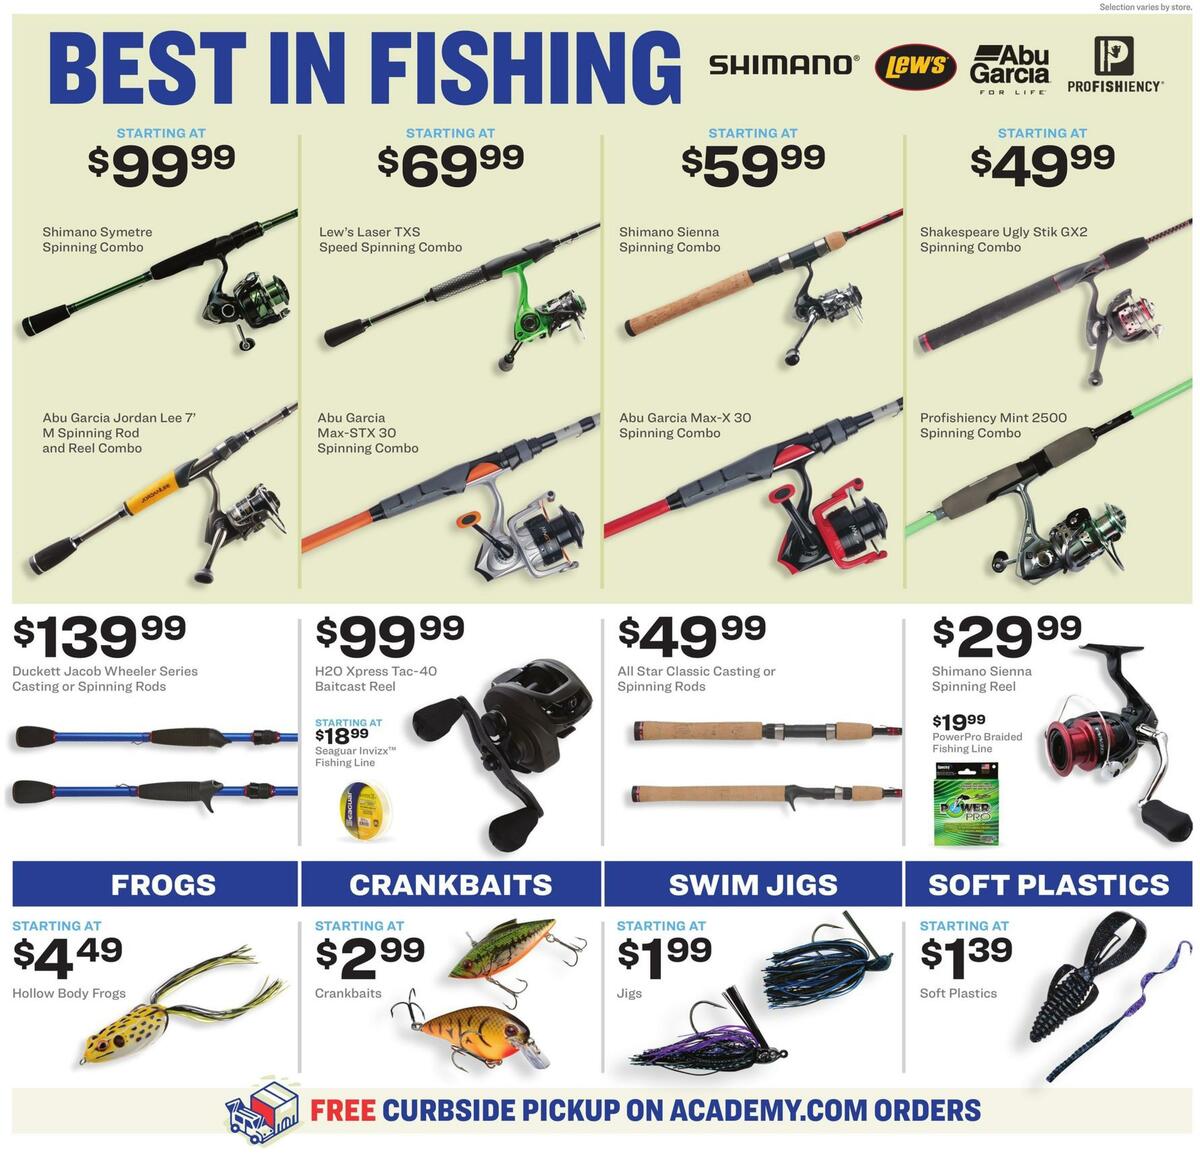 Academy Sports + Outdoors Outdoor Ad Weekly Ad from February 15